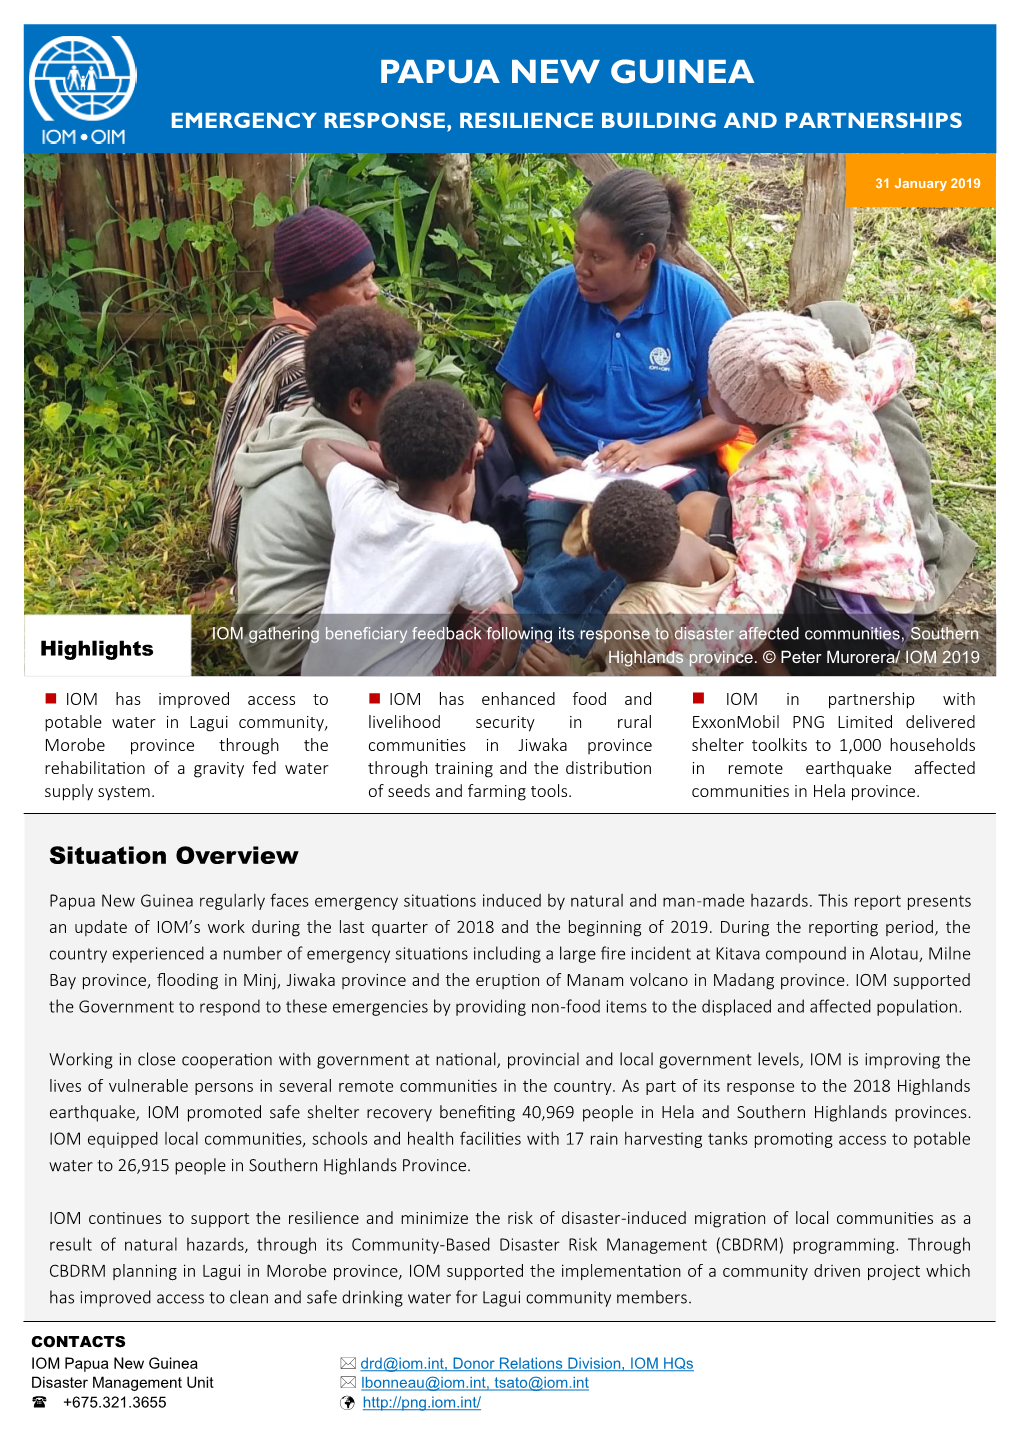 Papua New Guinea Emergency Response, Resilience Building and Partnerships